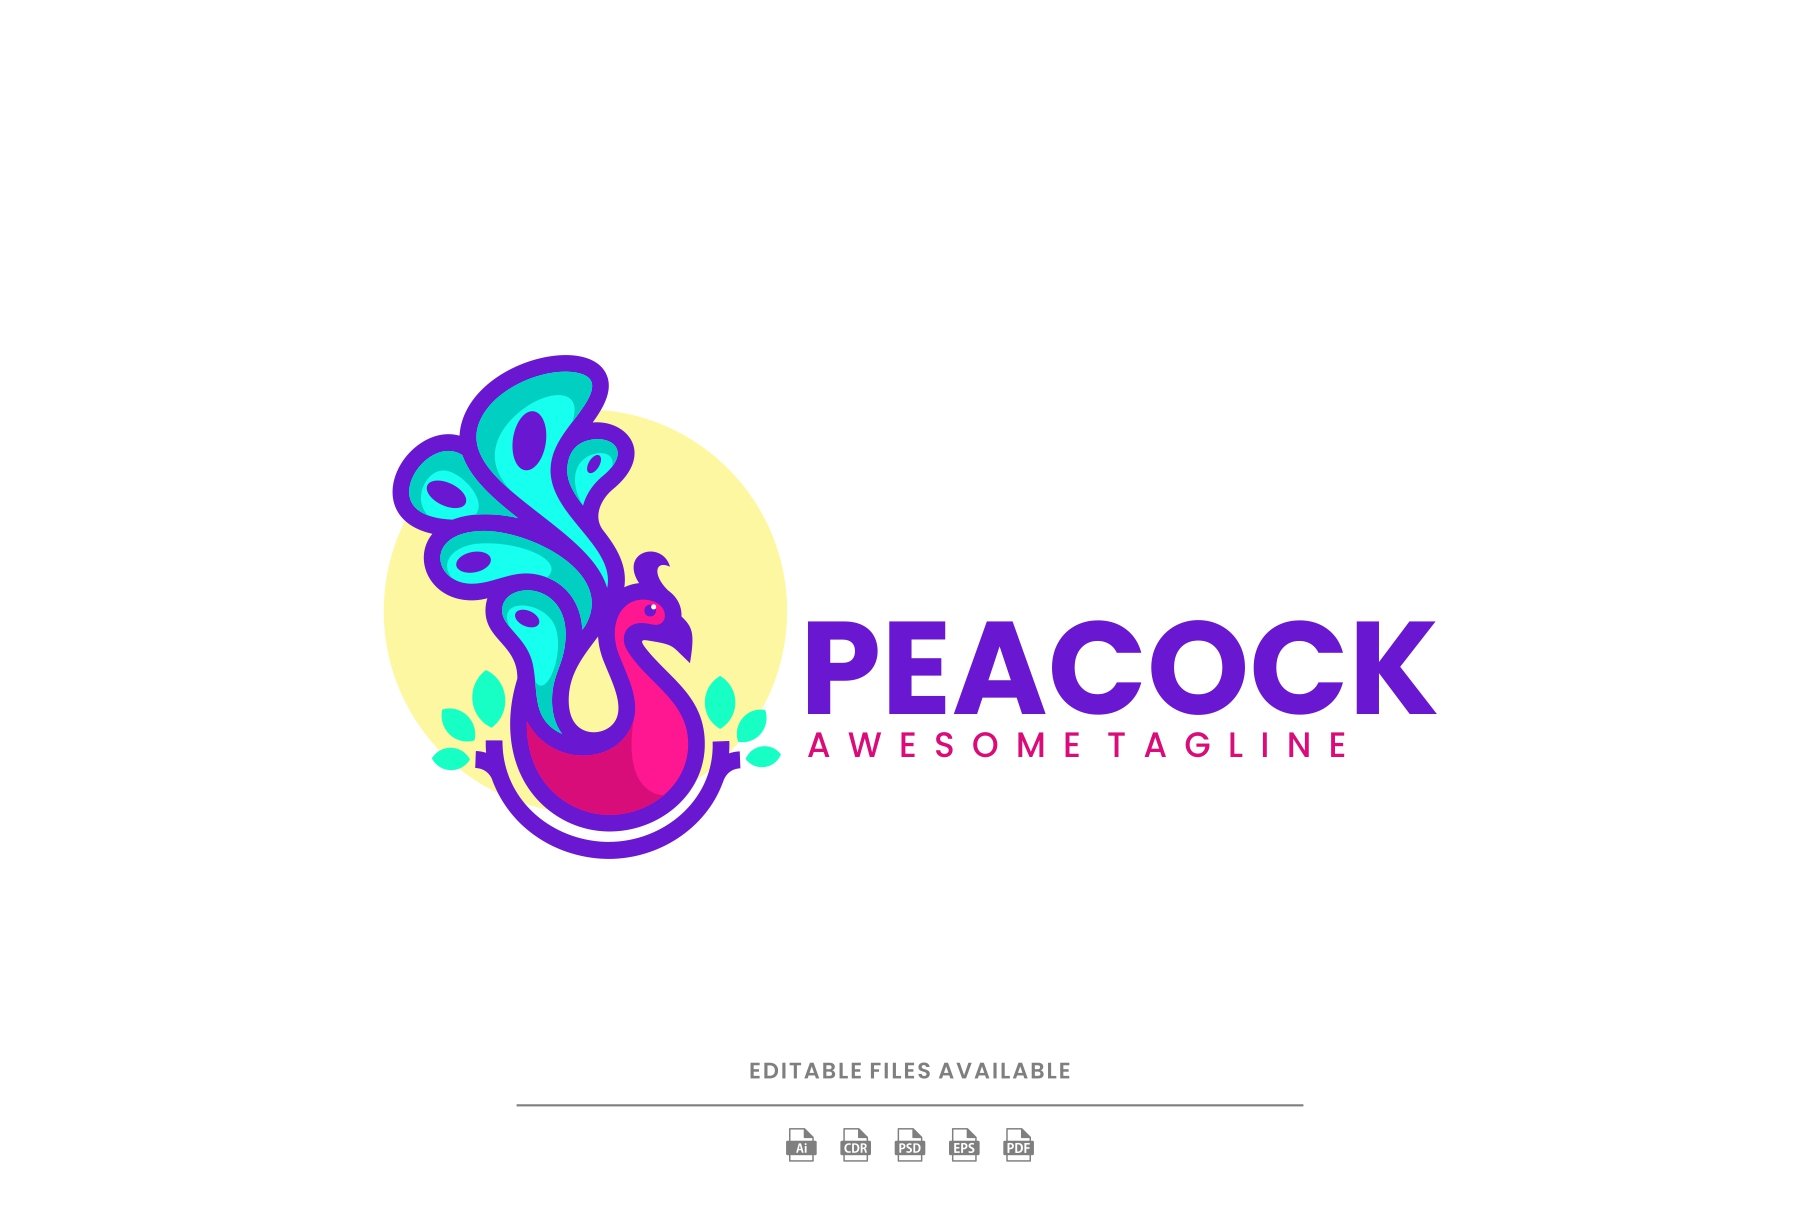 Peacock Simple Mascot Style cover image.